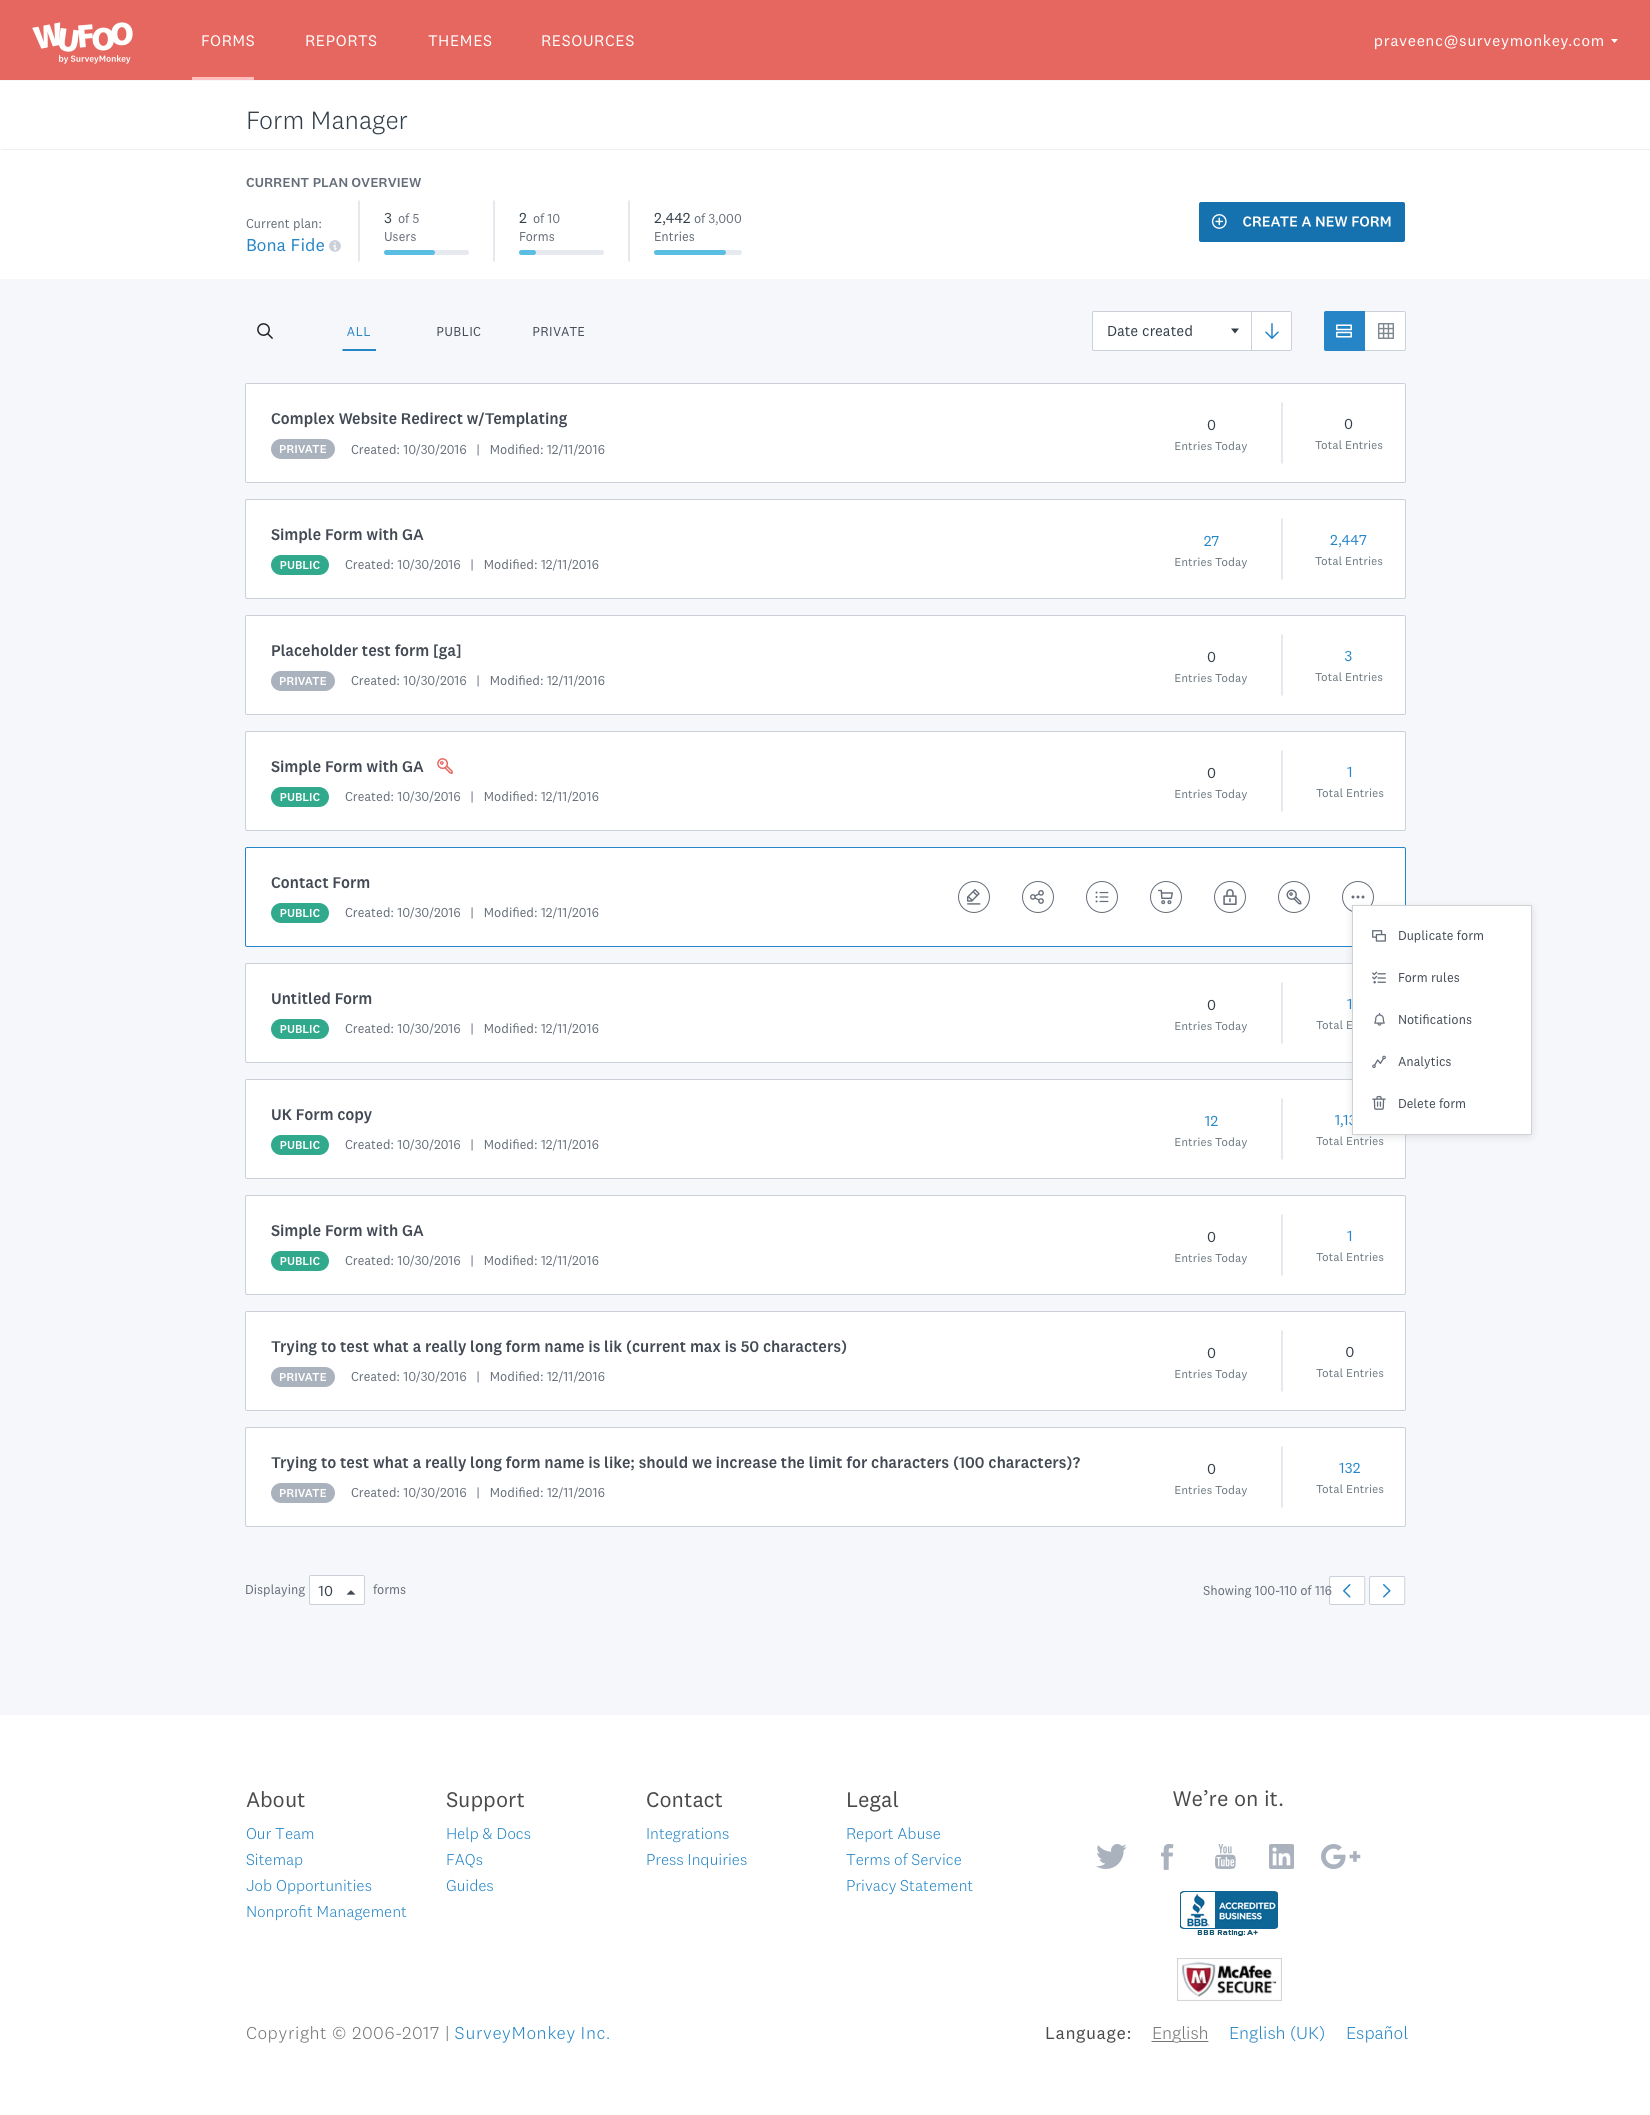 formmanager-paid-dashboard-form-hover-more.png